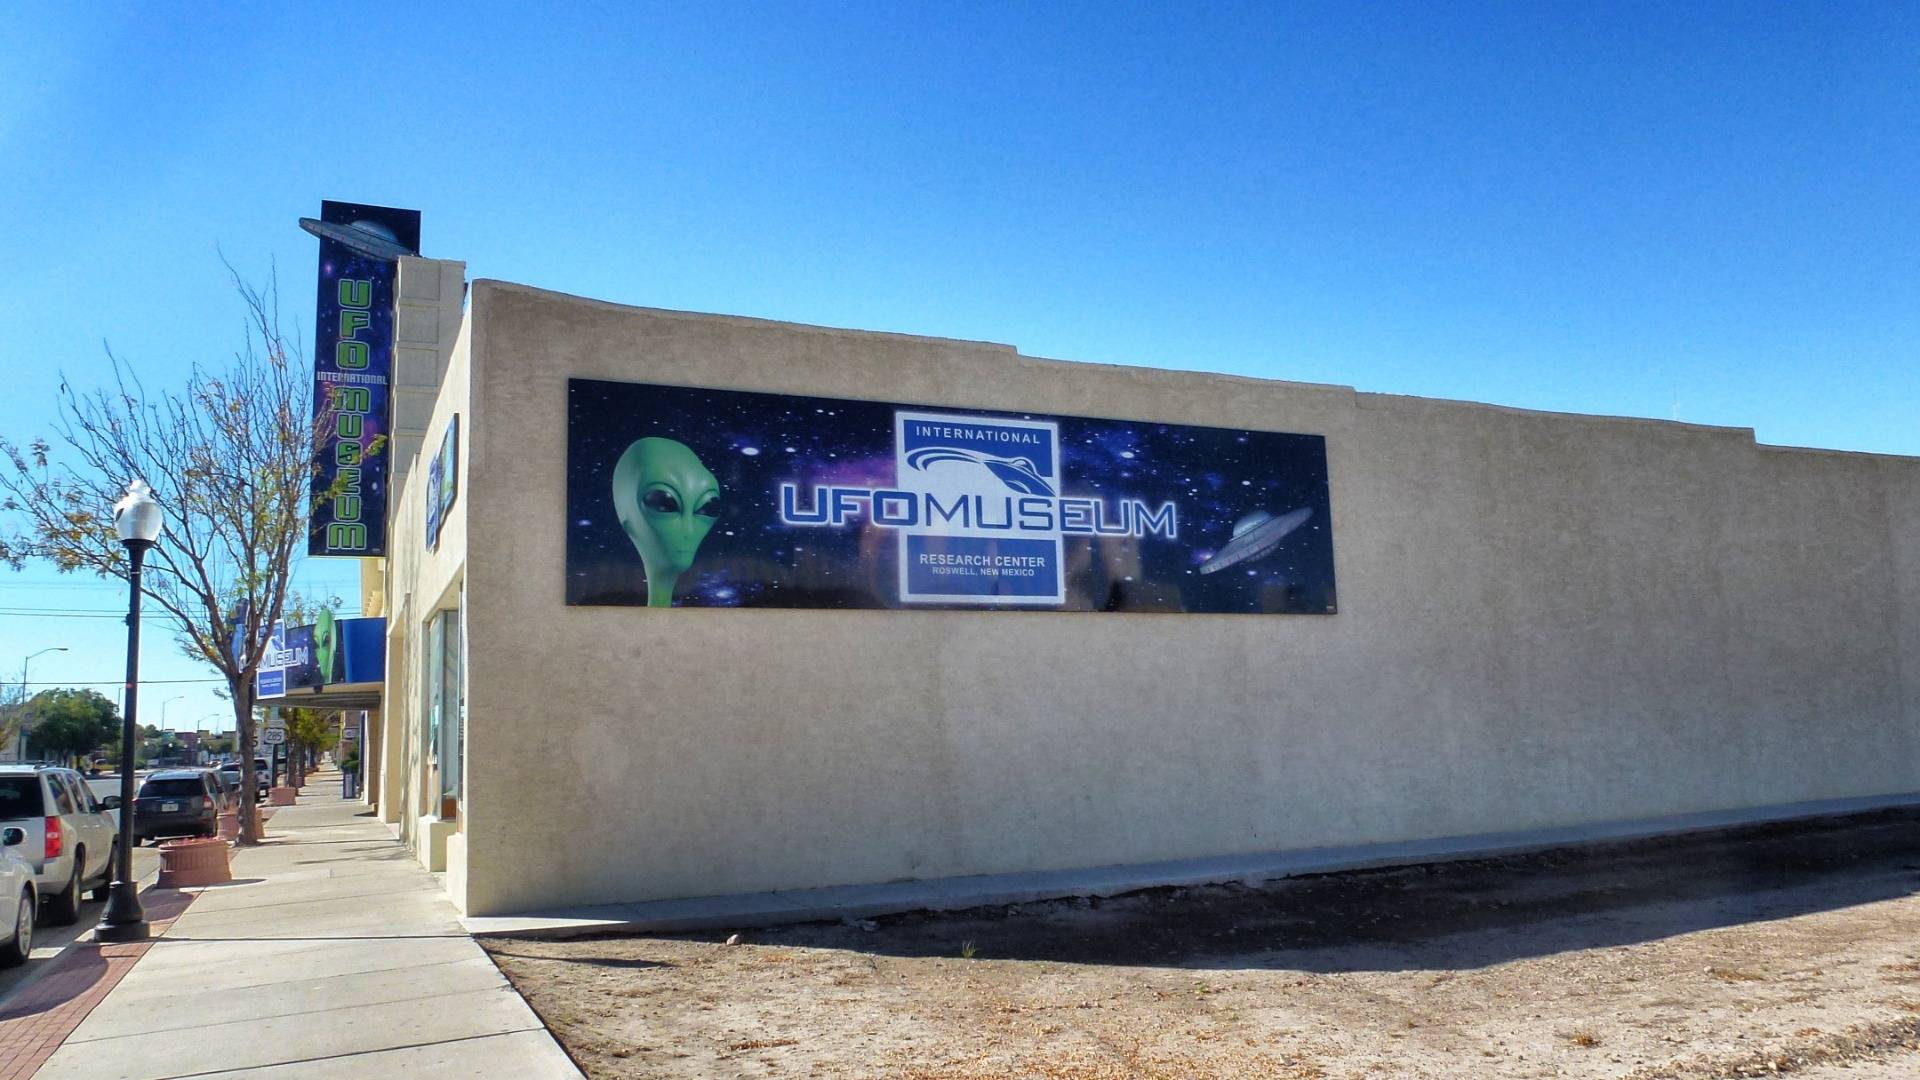 The Ufo-Museum on the Main Street of Roswell.